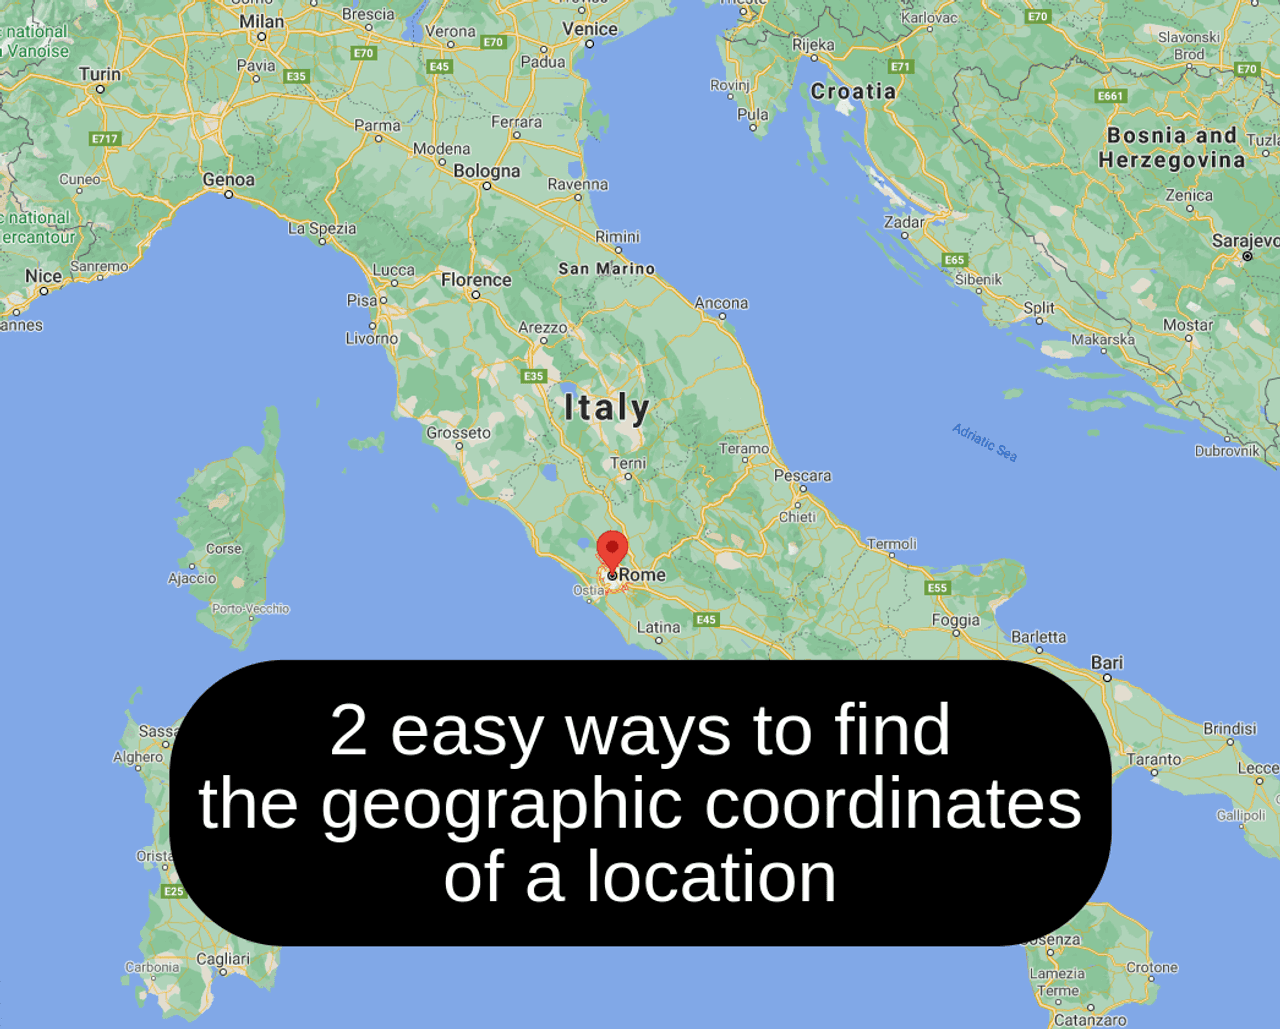 2 easy ways to find the geographic coordinates of a location